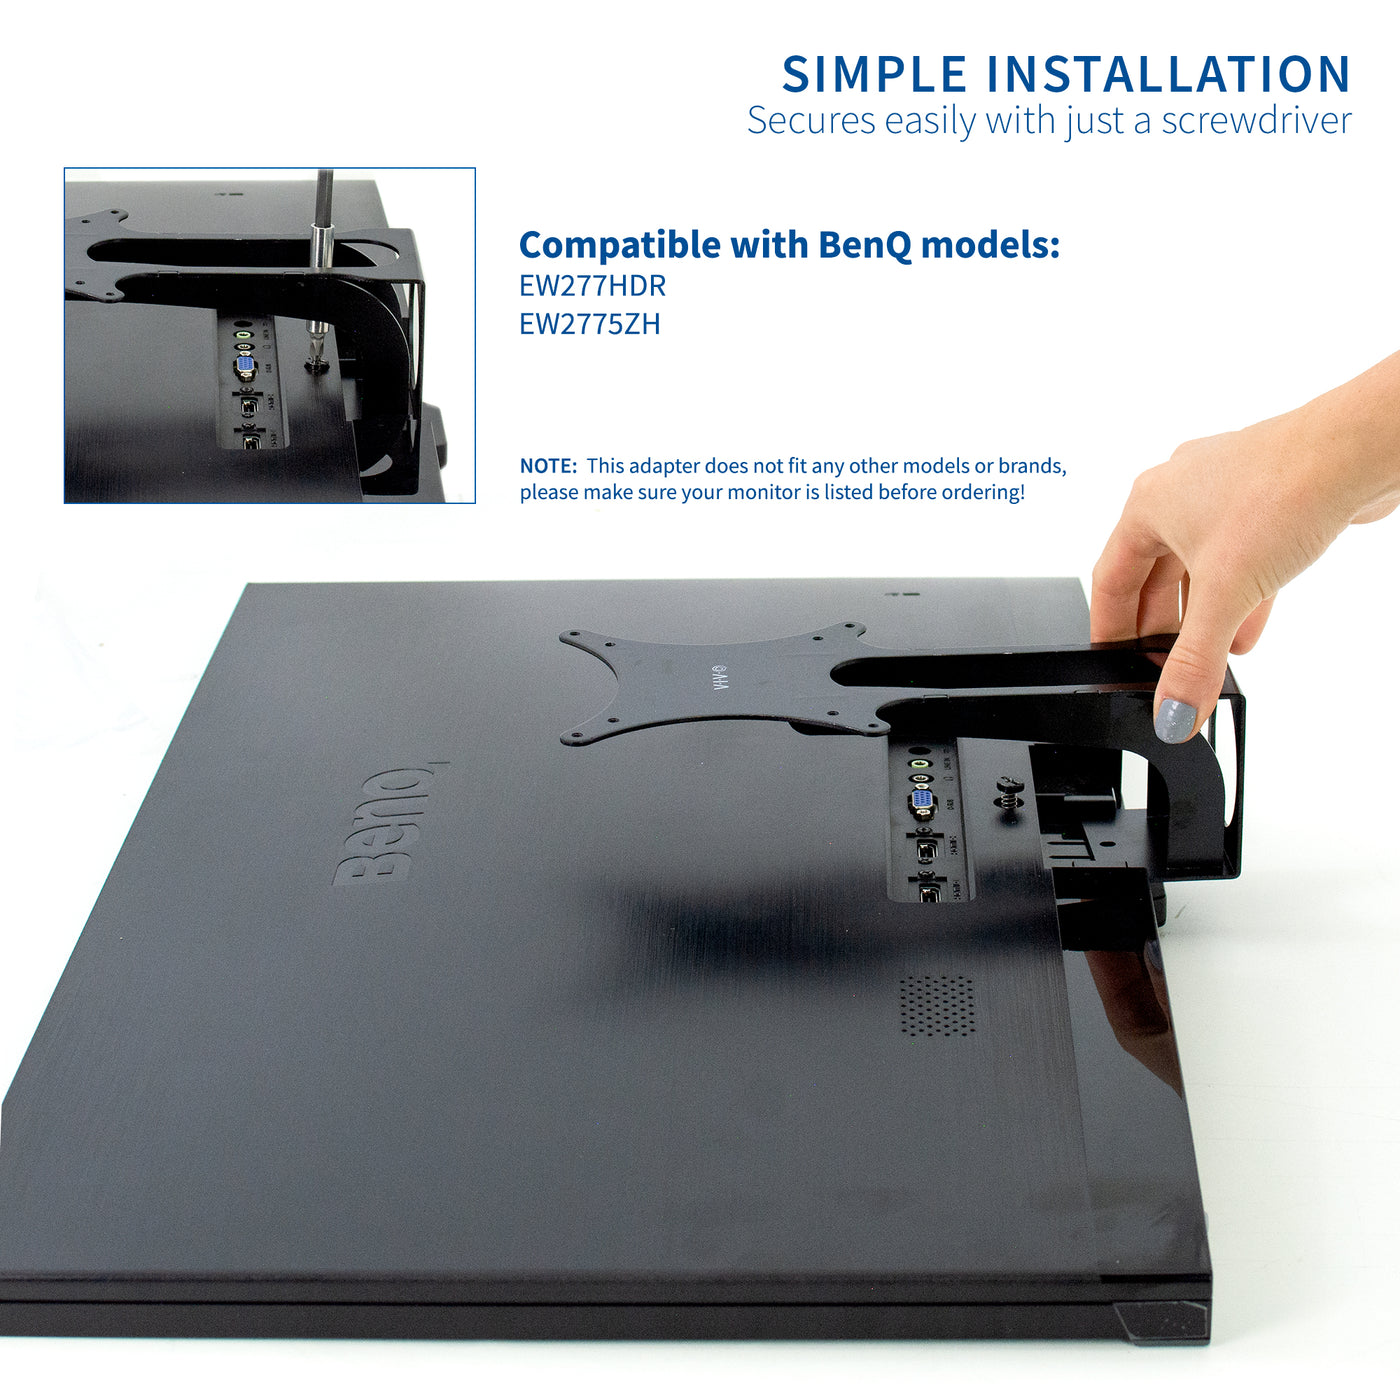 Installation process made easy with all required hardware and a manual. 